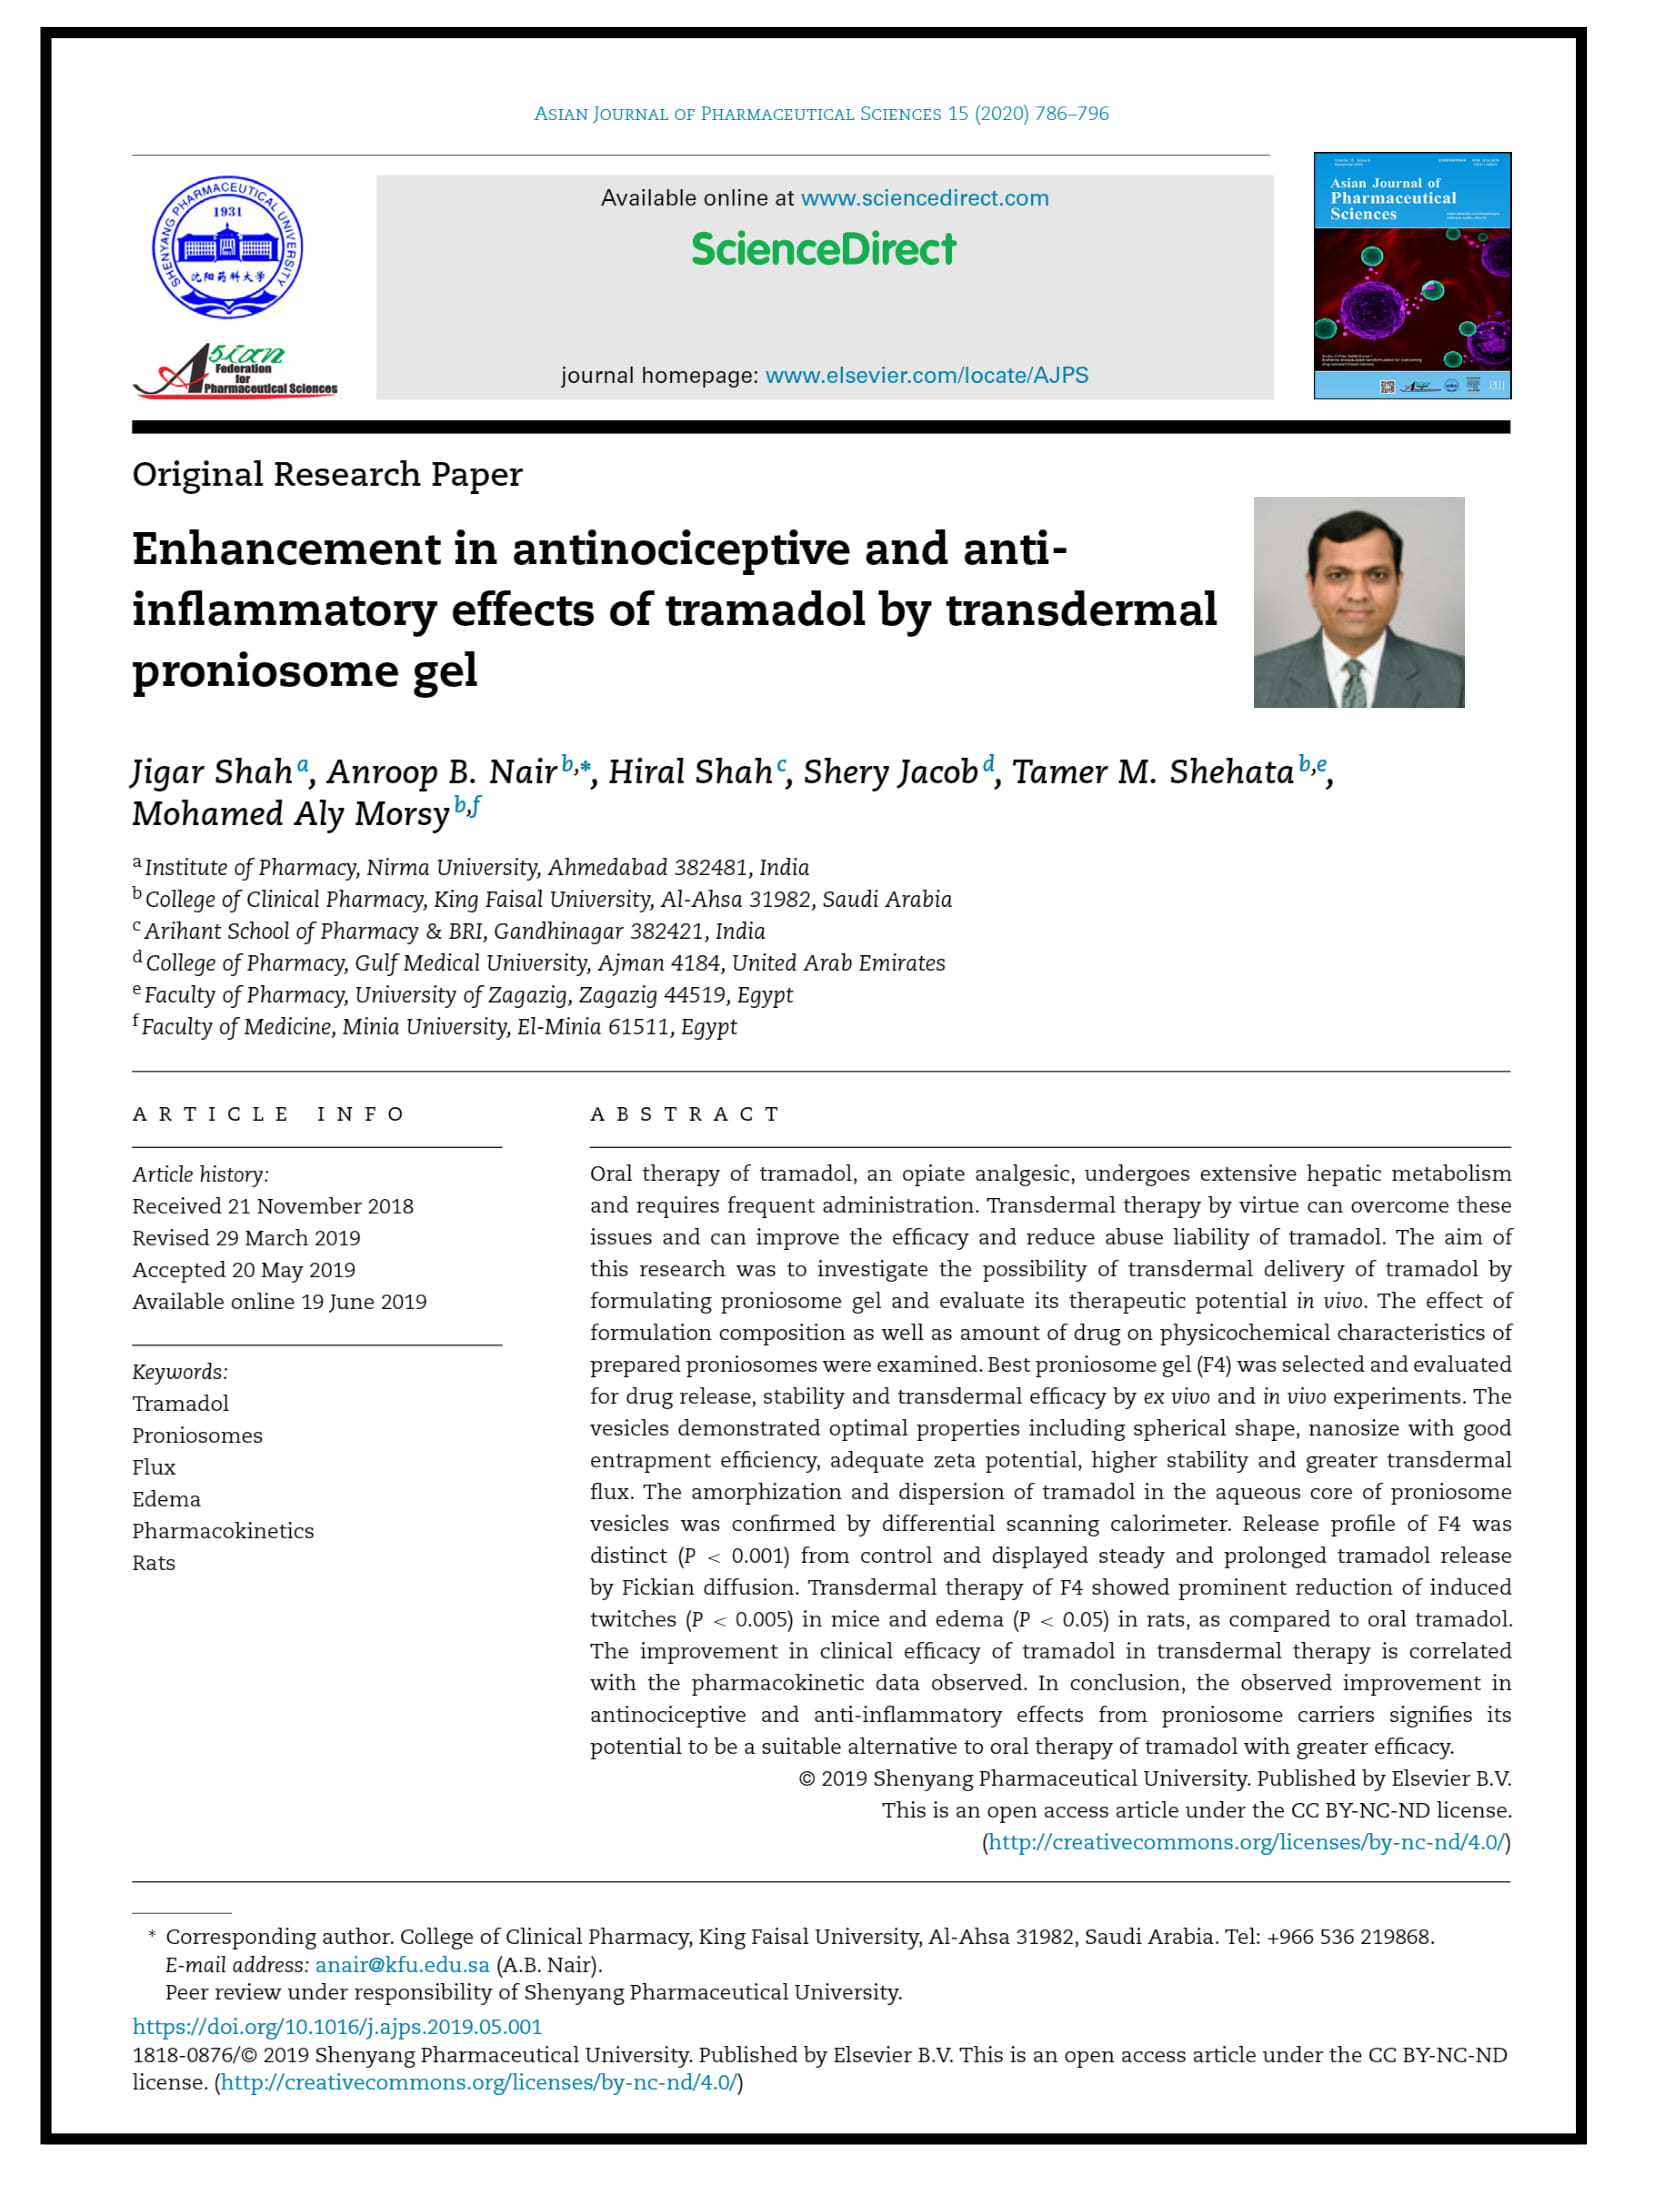 Enhancement in antinociceptive and anti-inflammatory effects of tramadol by transdermal proniosome gel